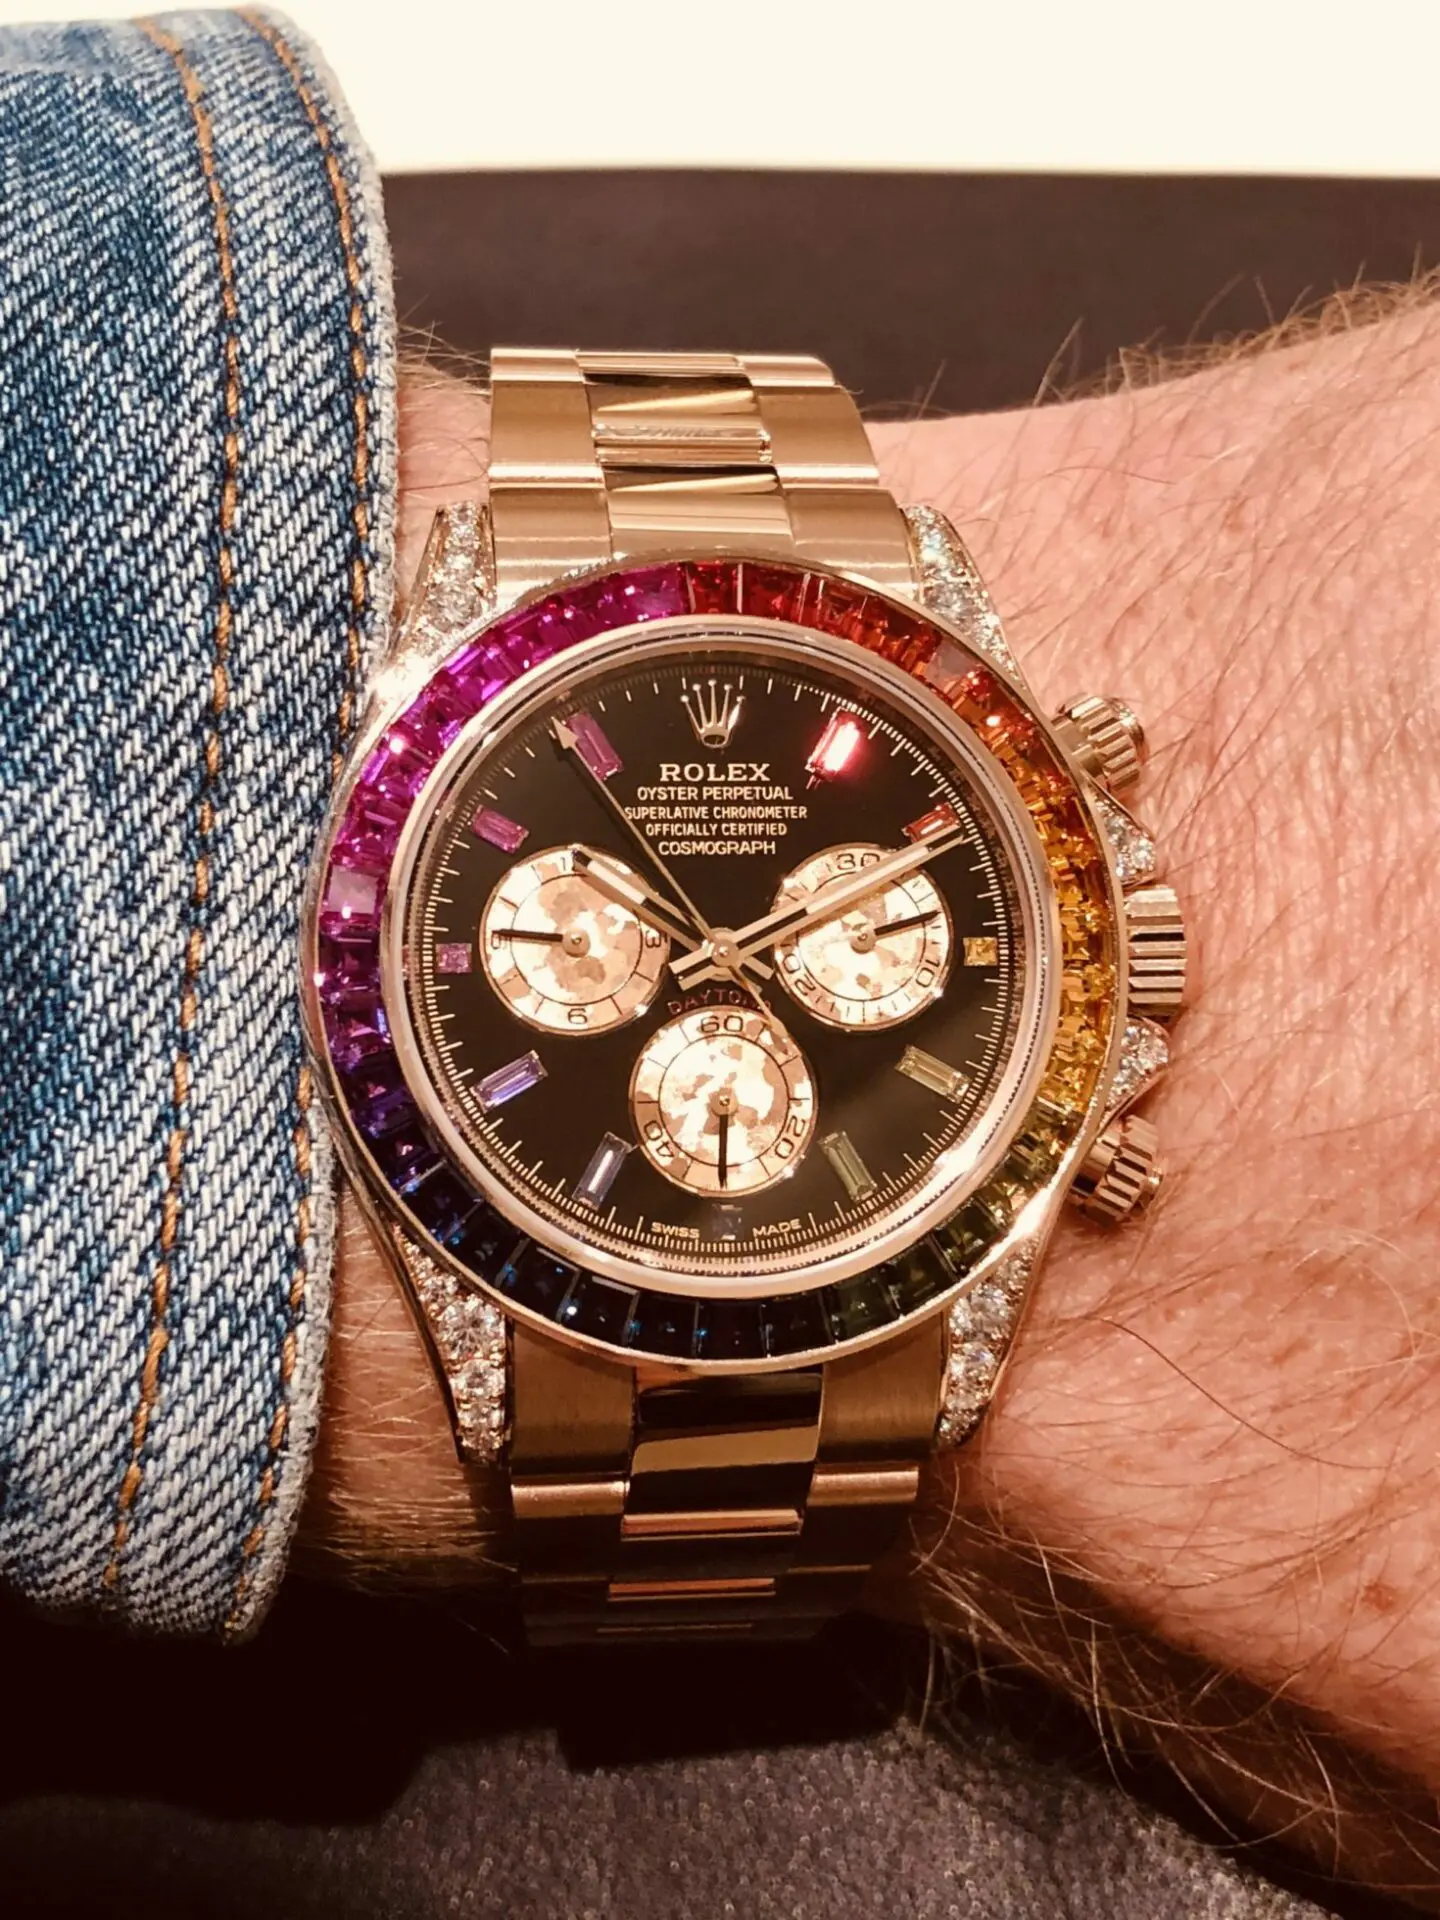 Stue Efterforskning Accor 8 celebs wearing the hell out of a Rolex Rainbow Daytona